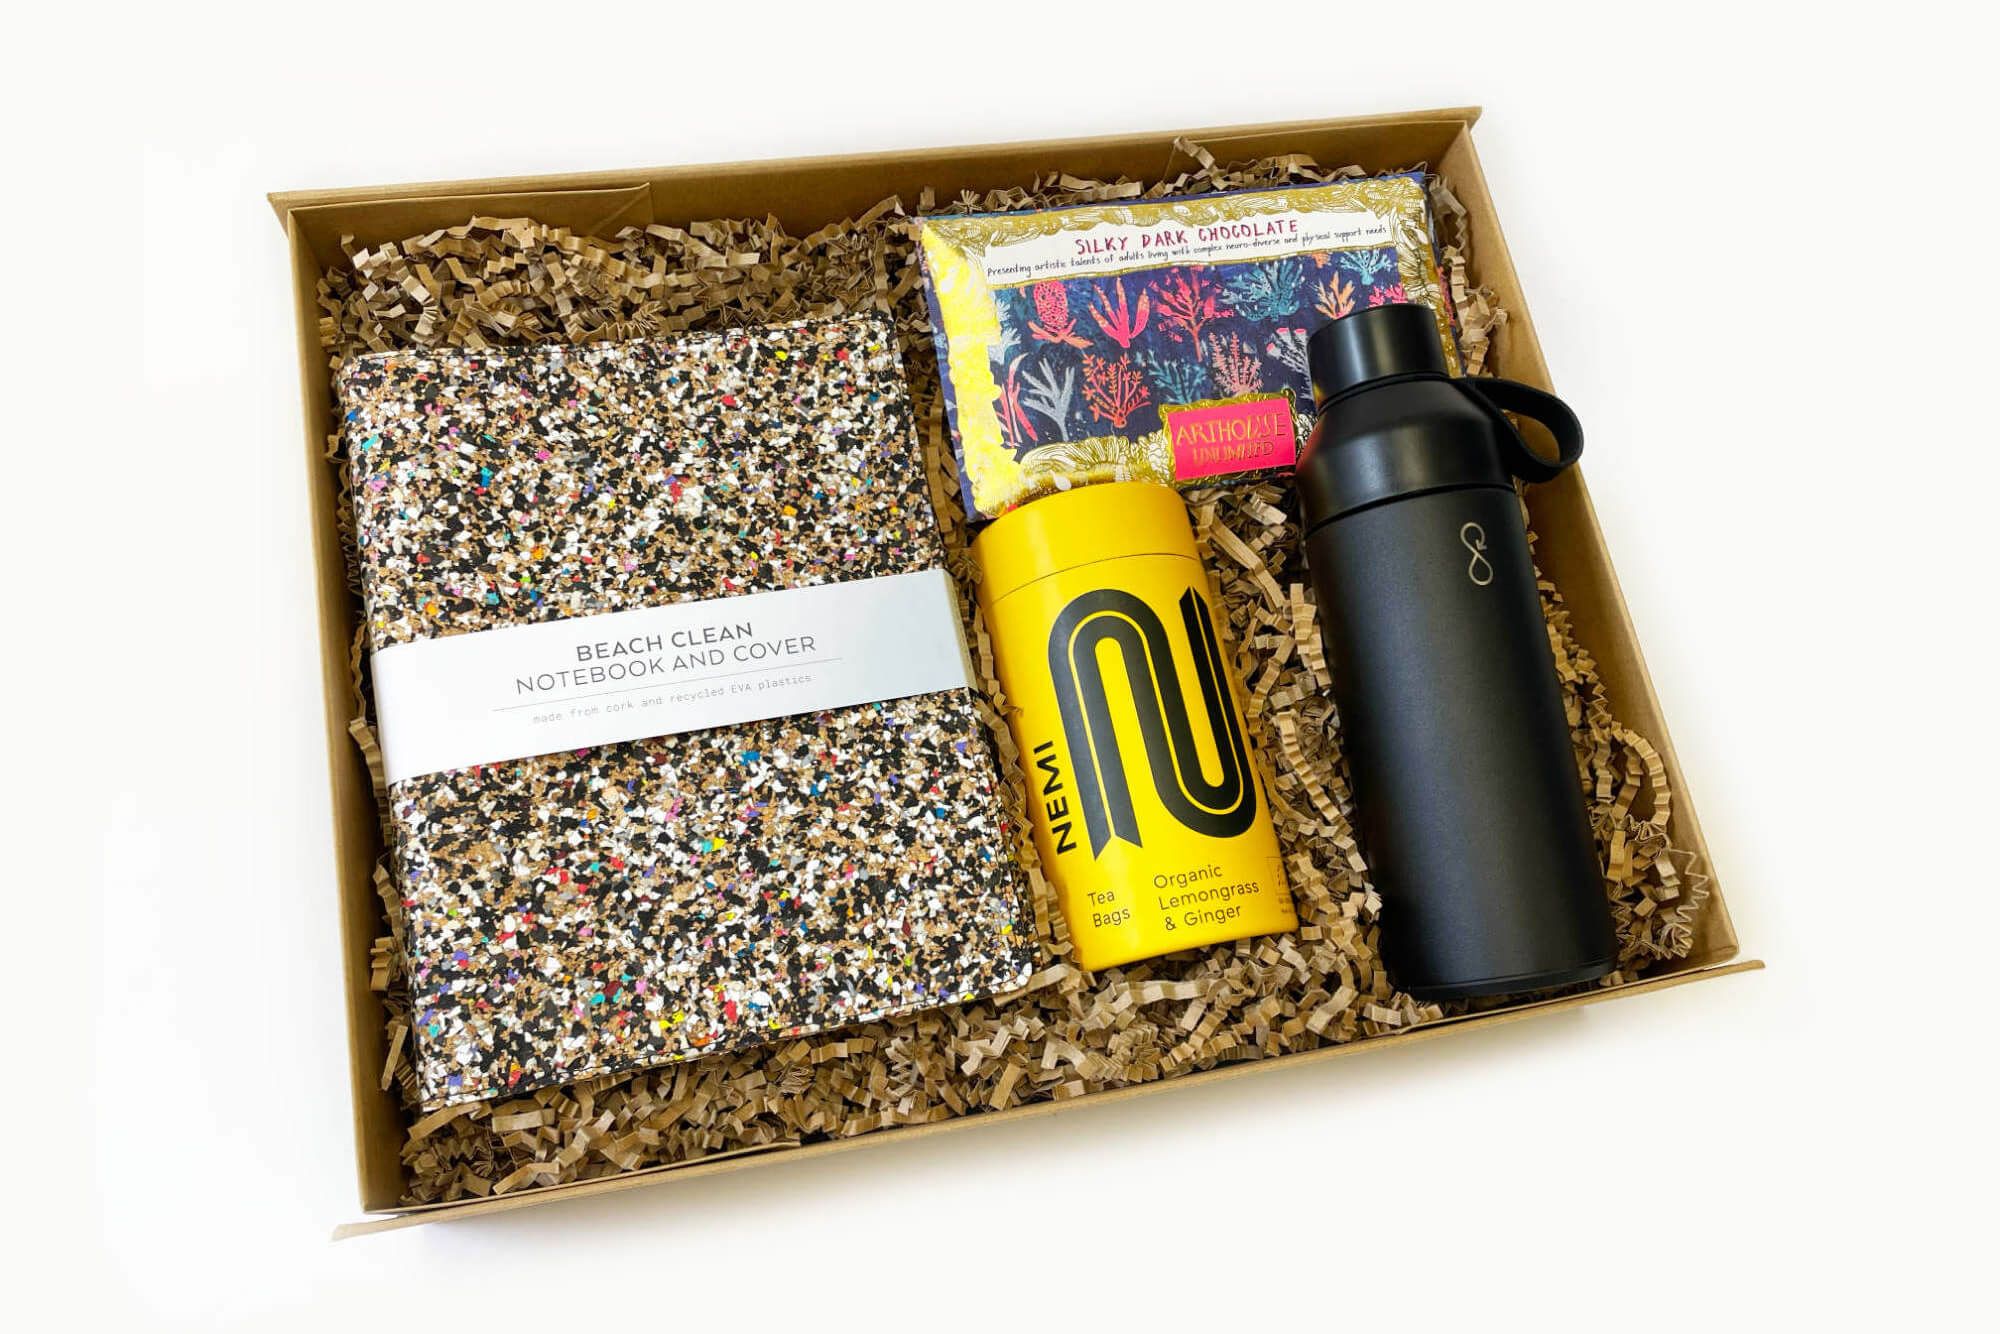 New year corporate gifts including a Beach Clean notebook, Nemi Teas, Arthouse chocolate and an Ocean Bottle